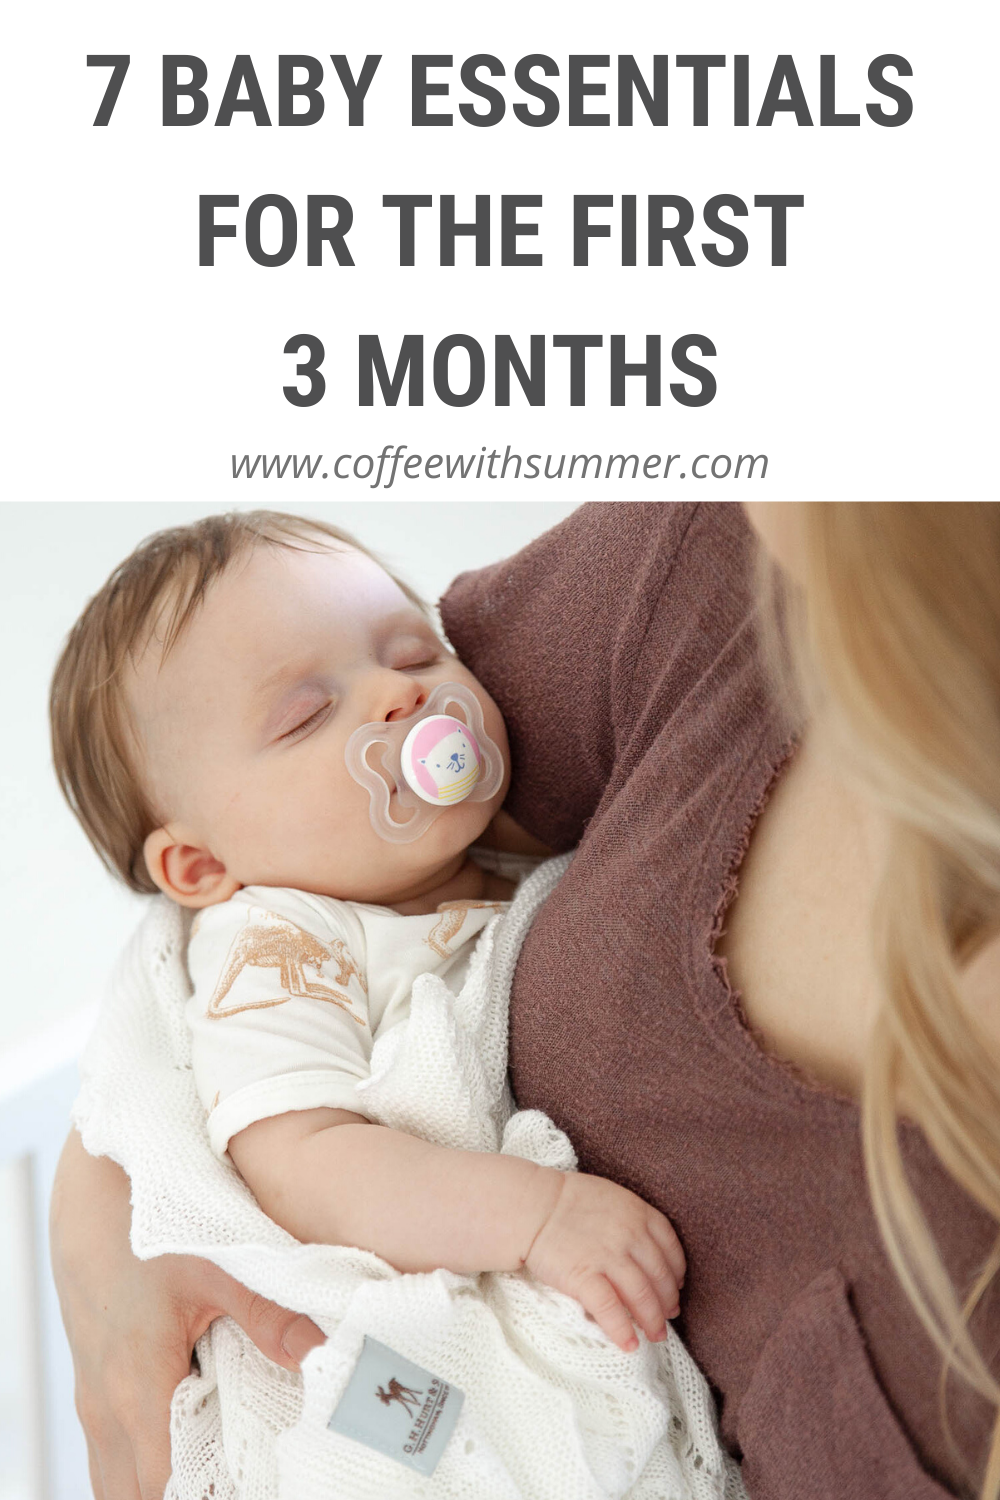 Baby Essentials For The First 3 Months